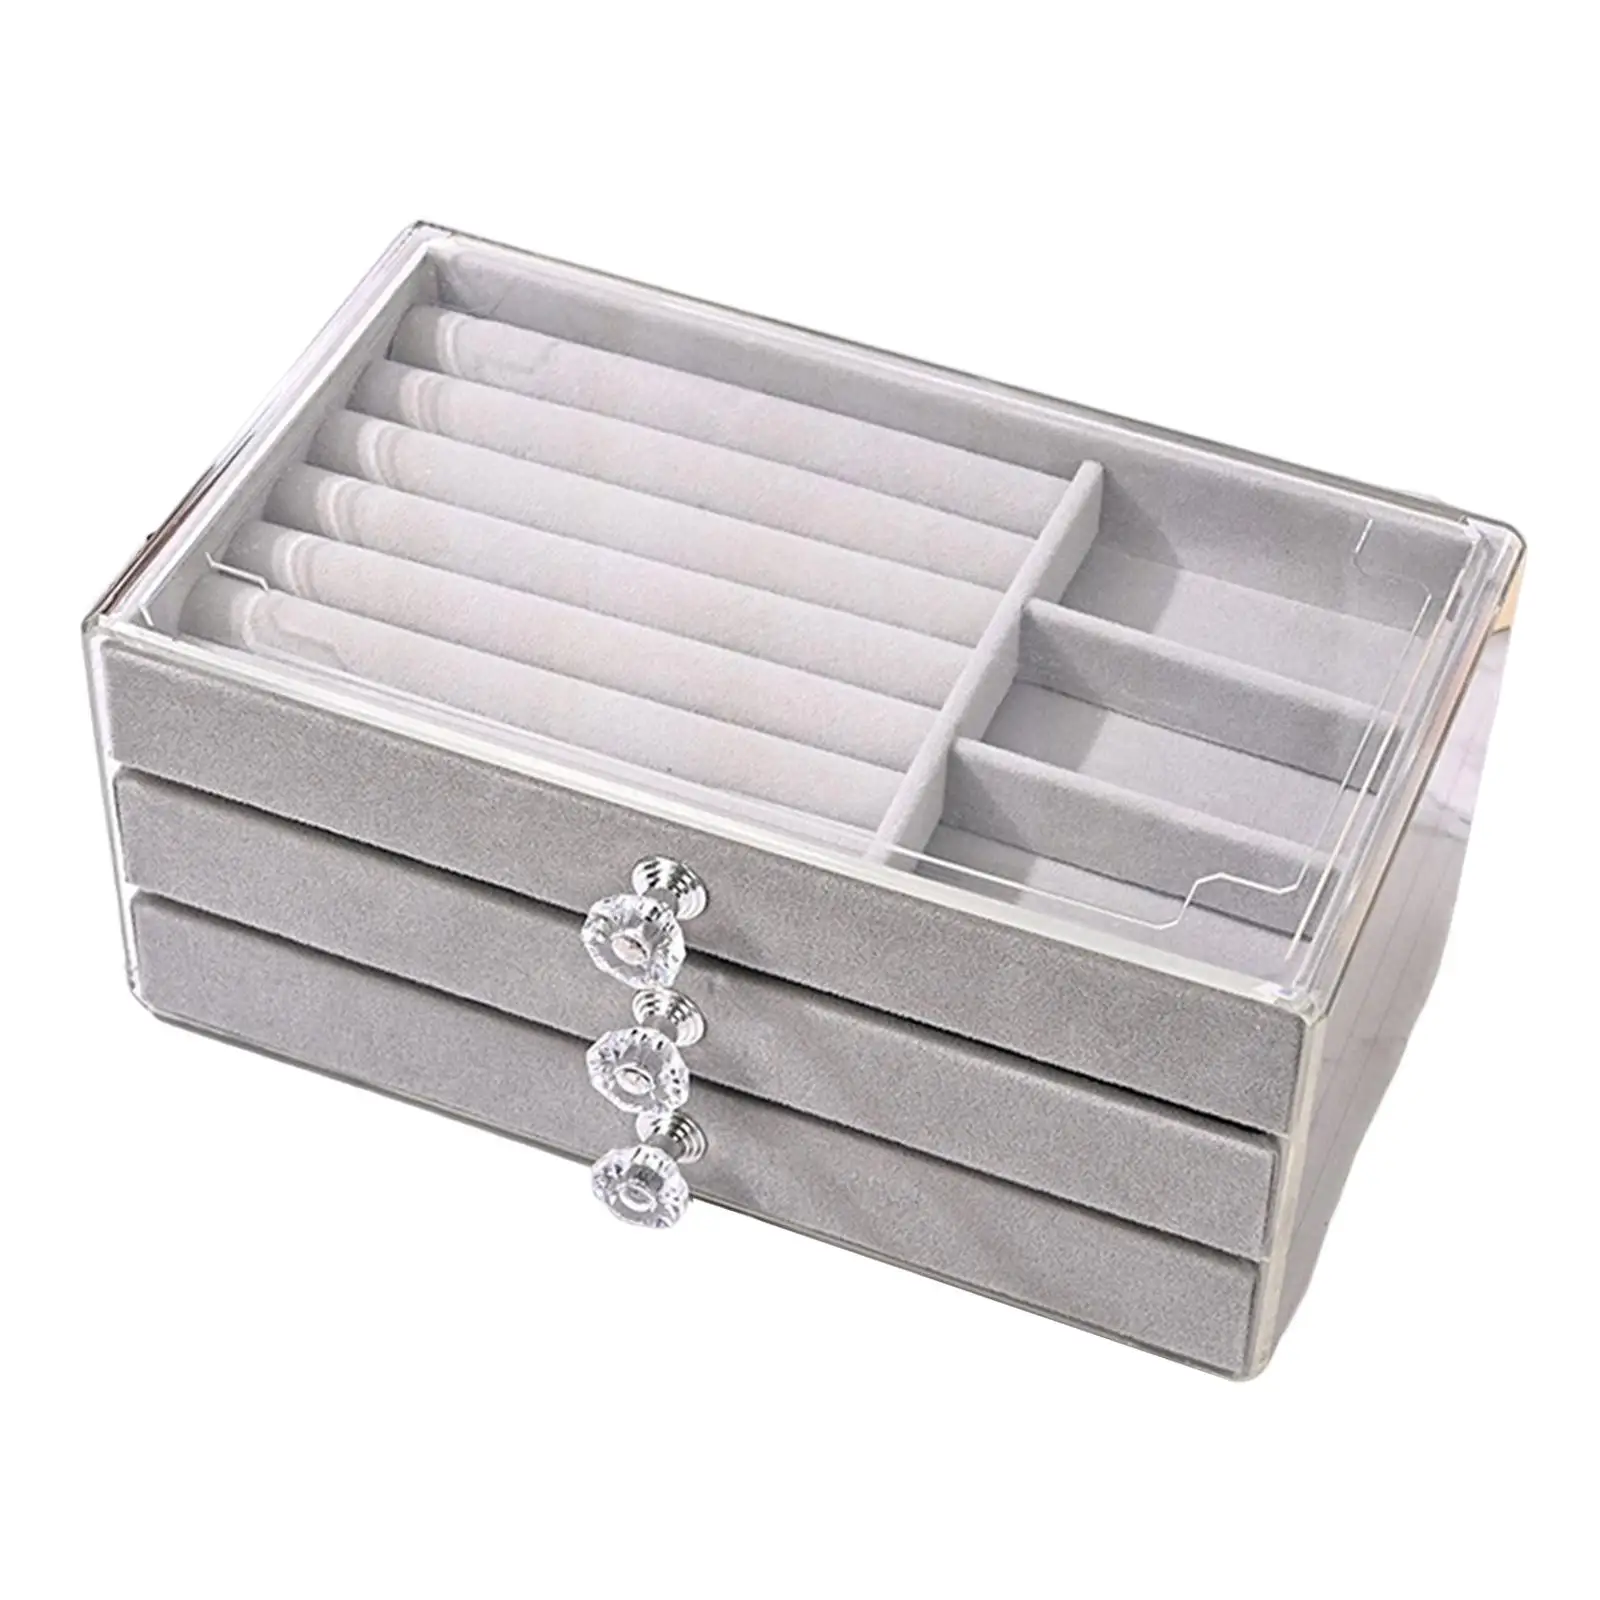 Acrylic Jewelry Organizer with 3 Drawers Velvet Jewelry Storage Holder for Necklace Bangle Bracelet Watch Brooch Multifunctional